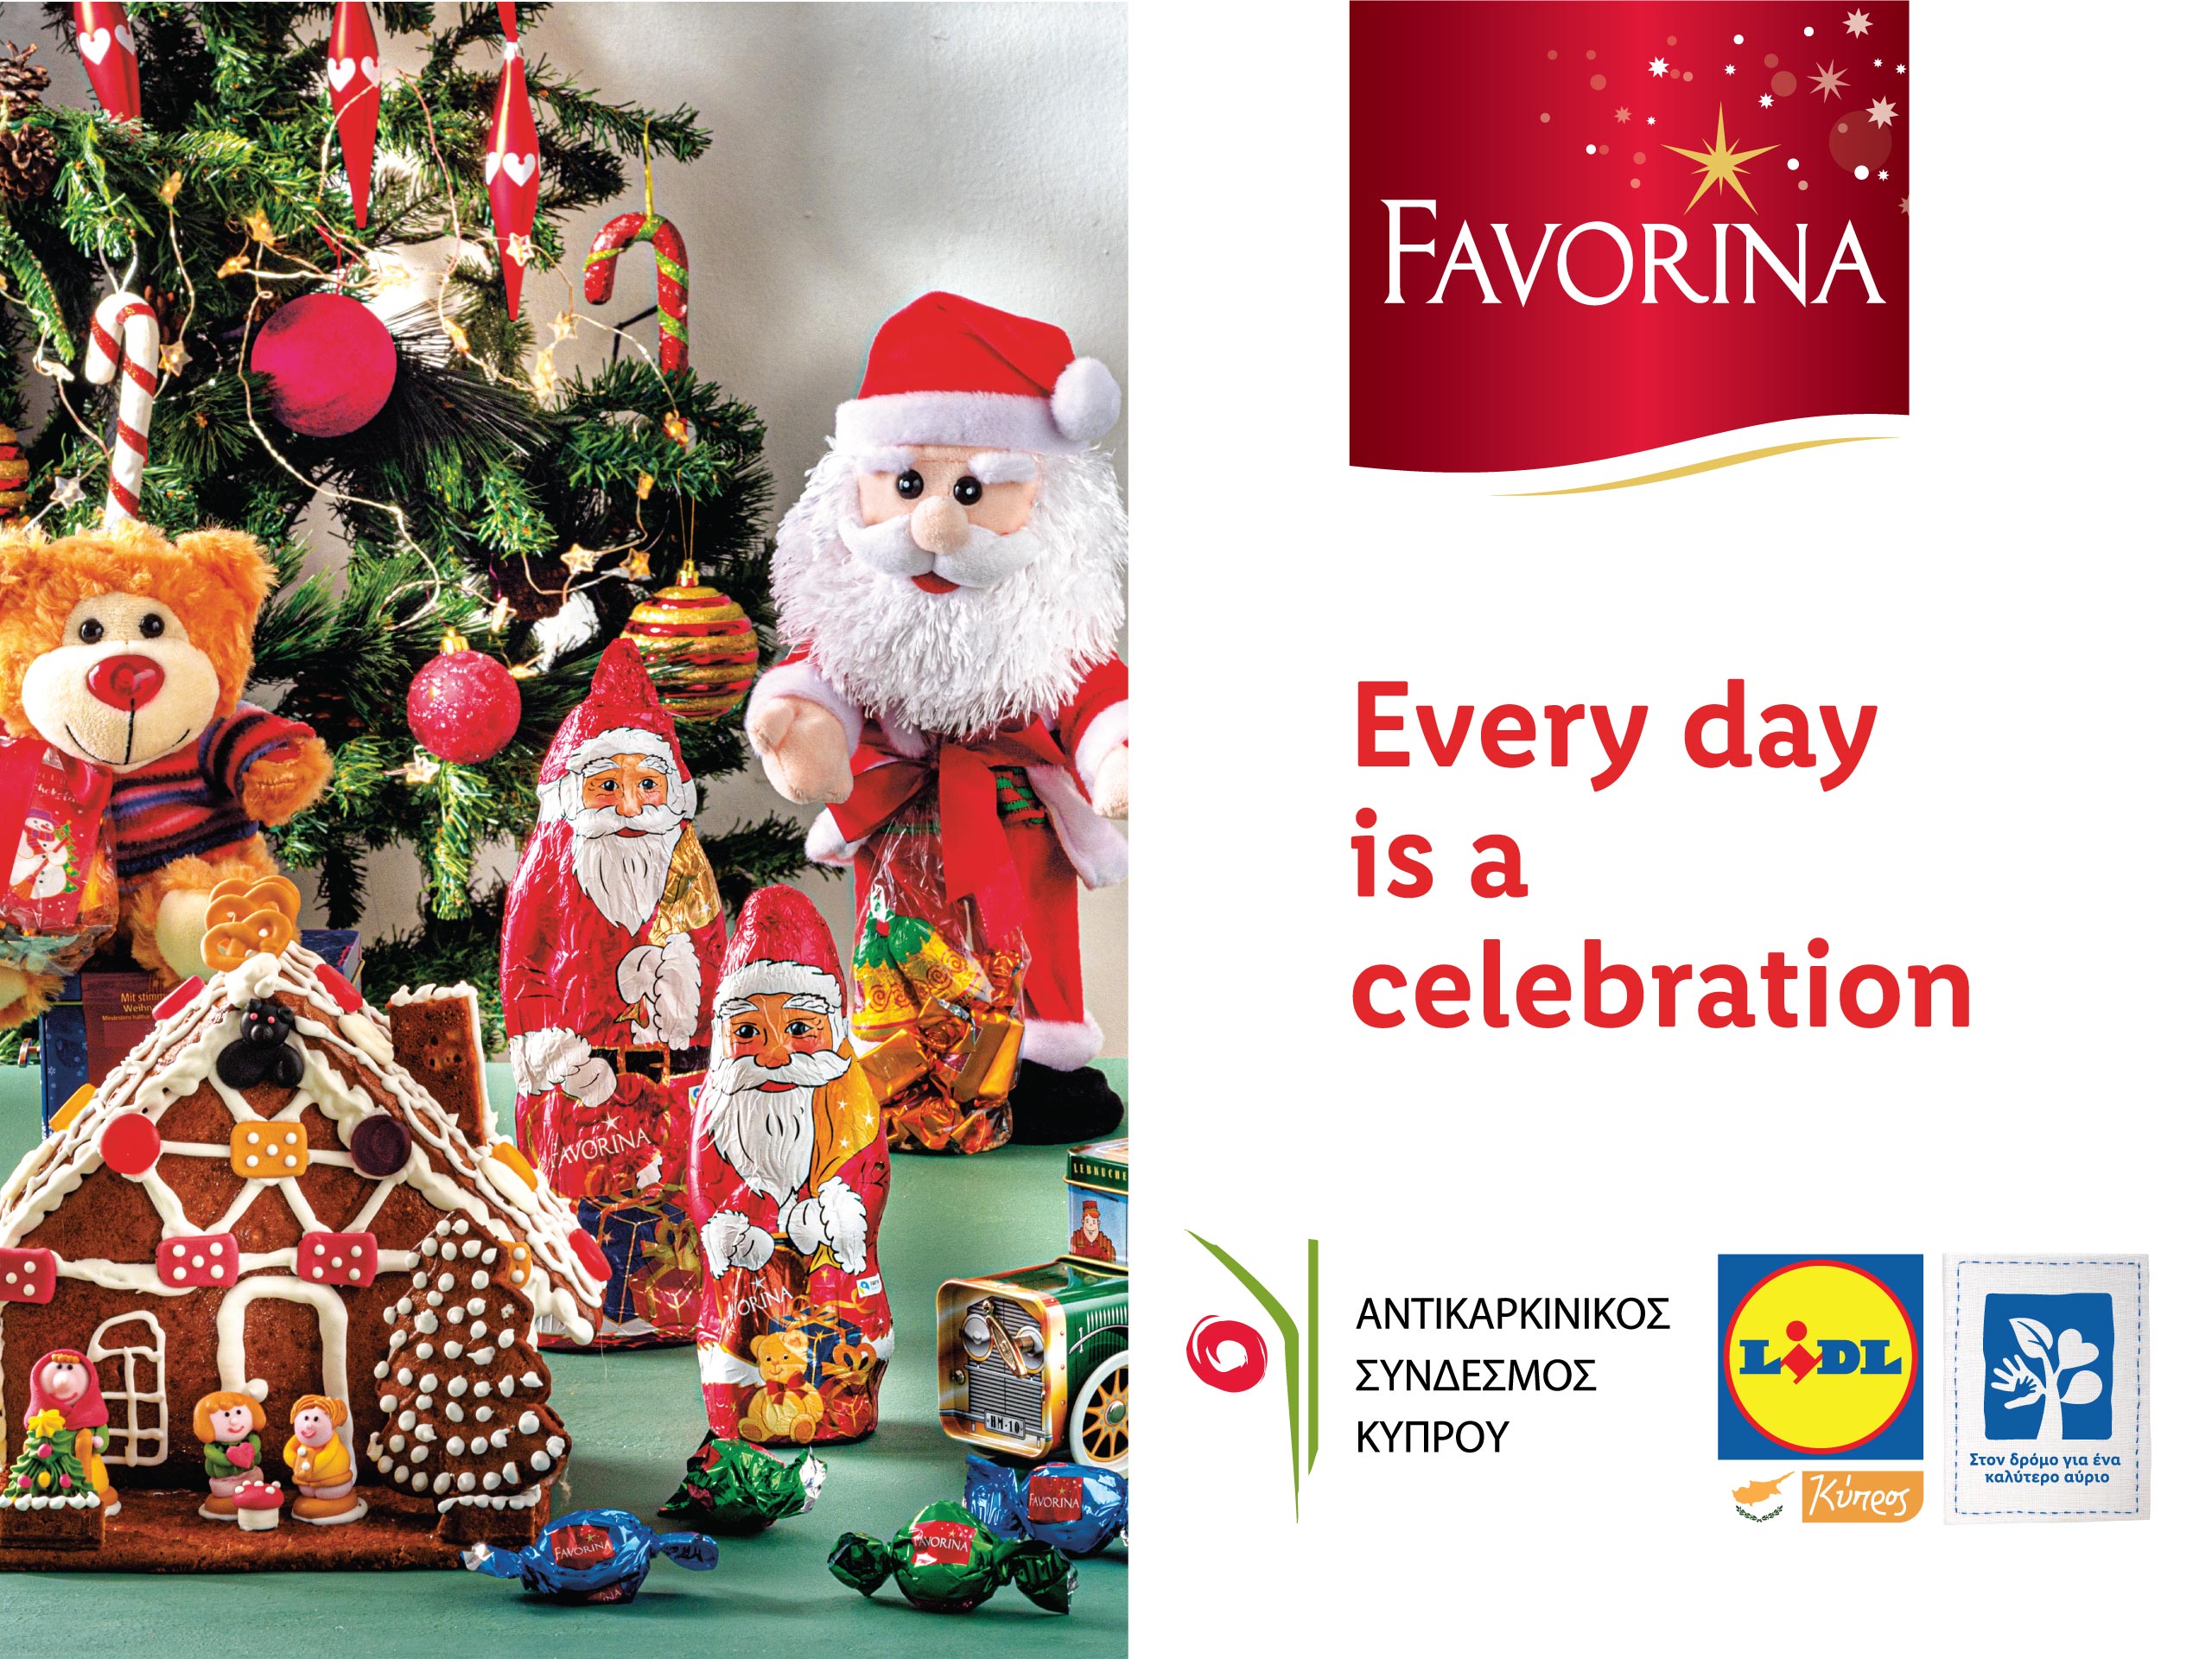 Favorina Lidl Cyprus also offers love these holidays with Favorina products